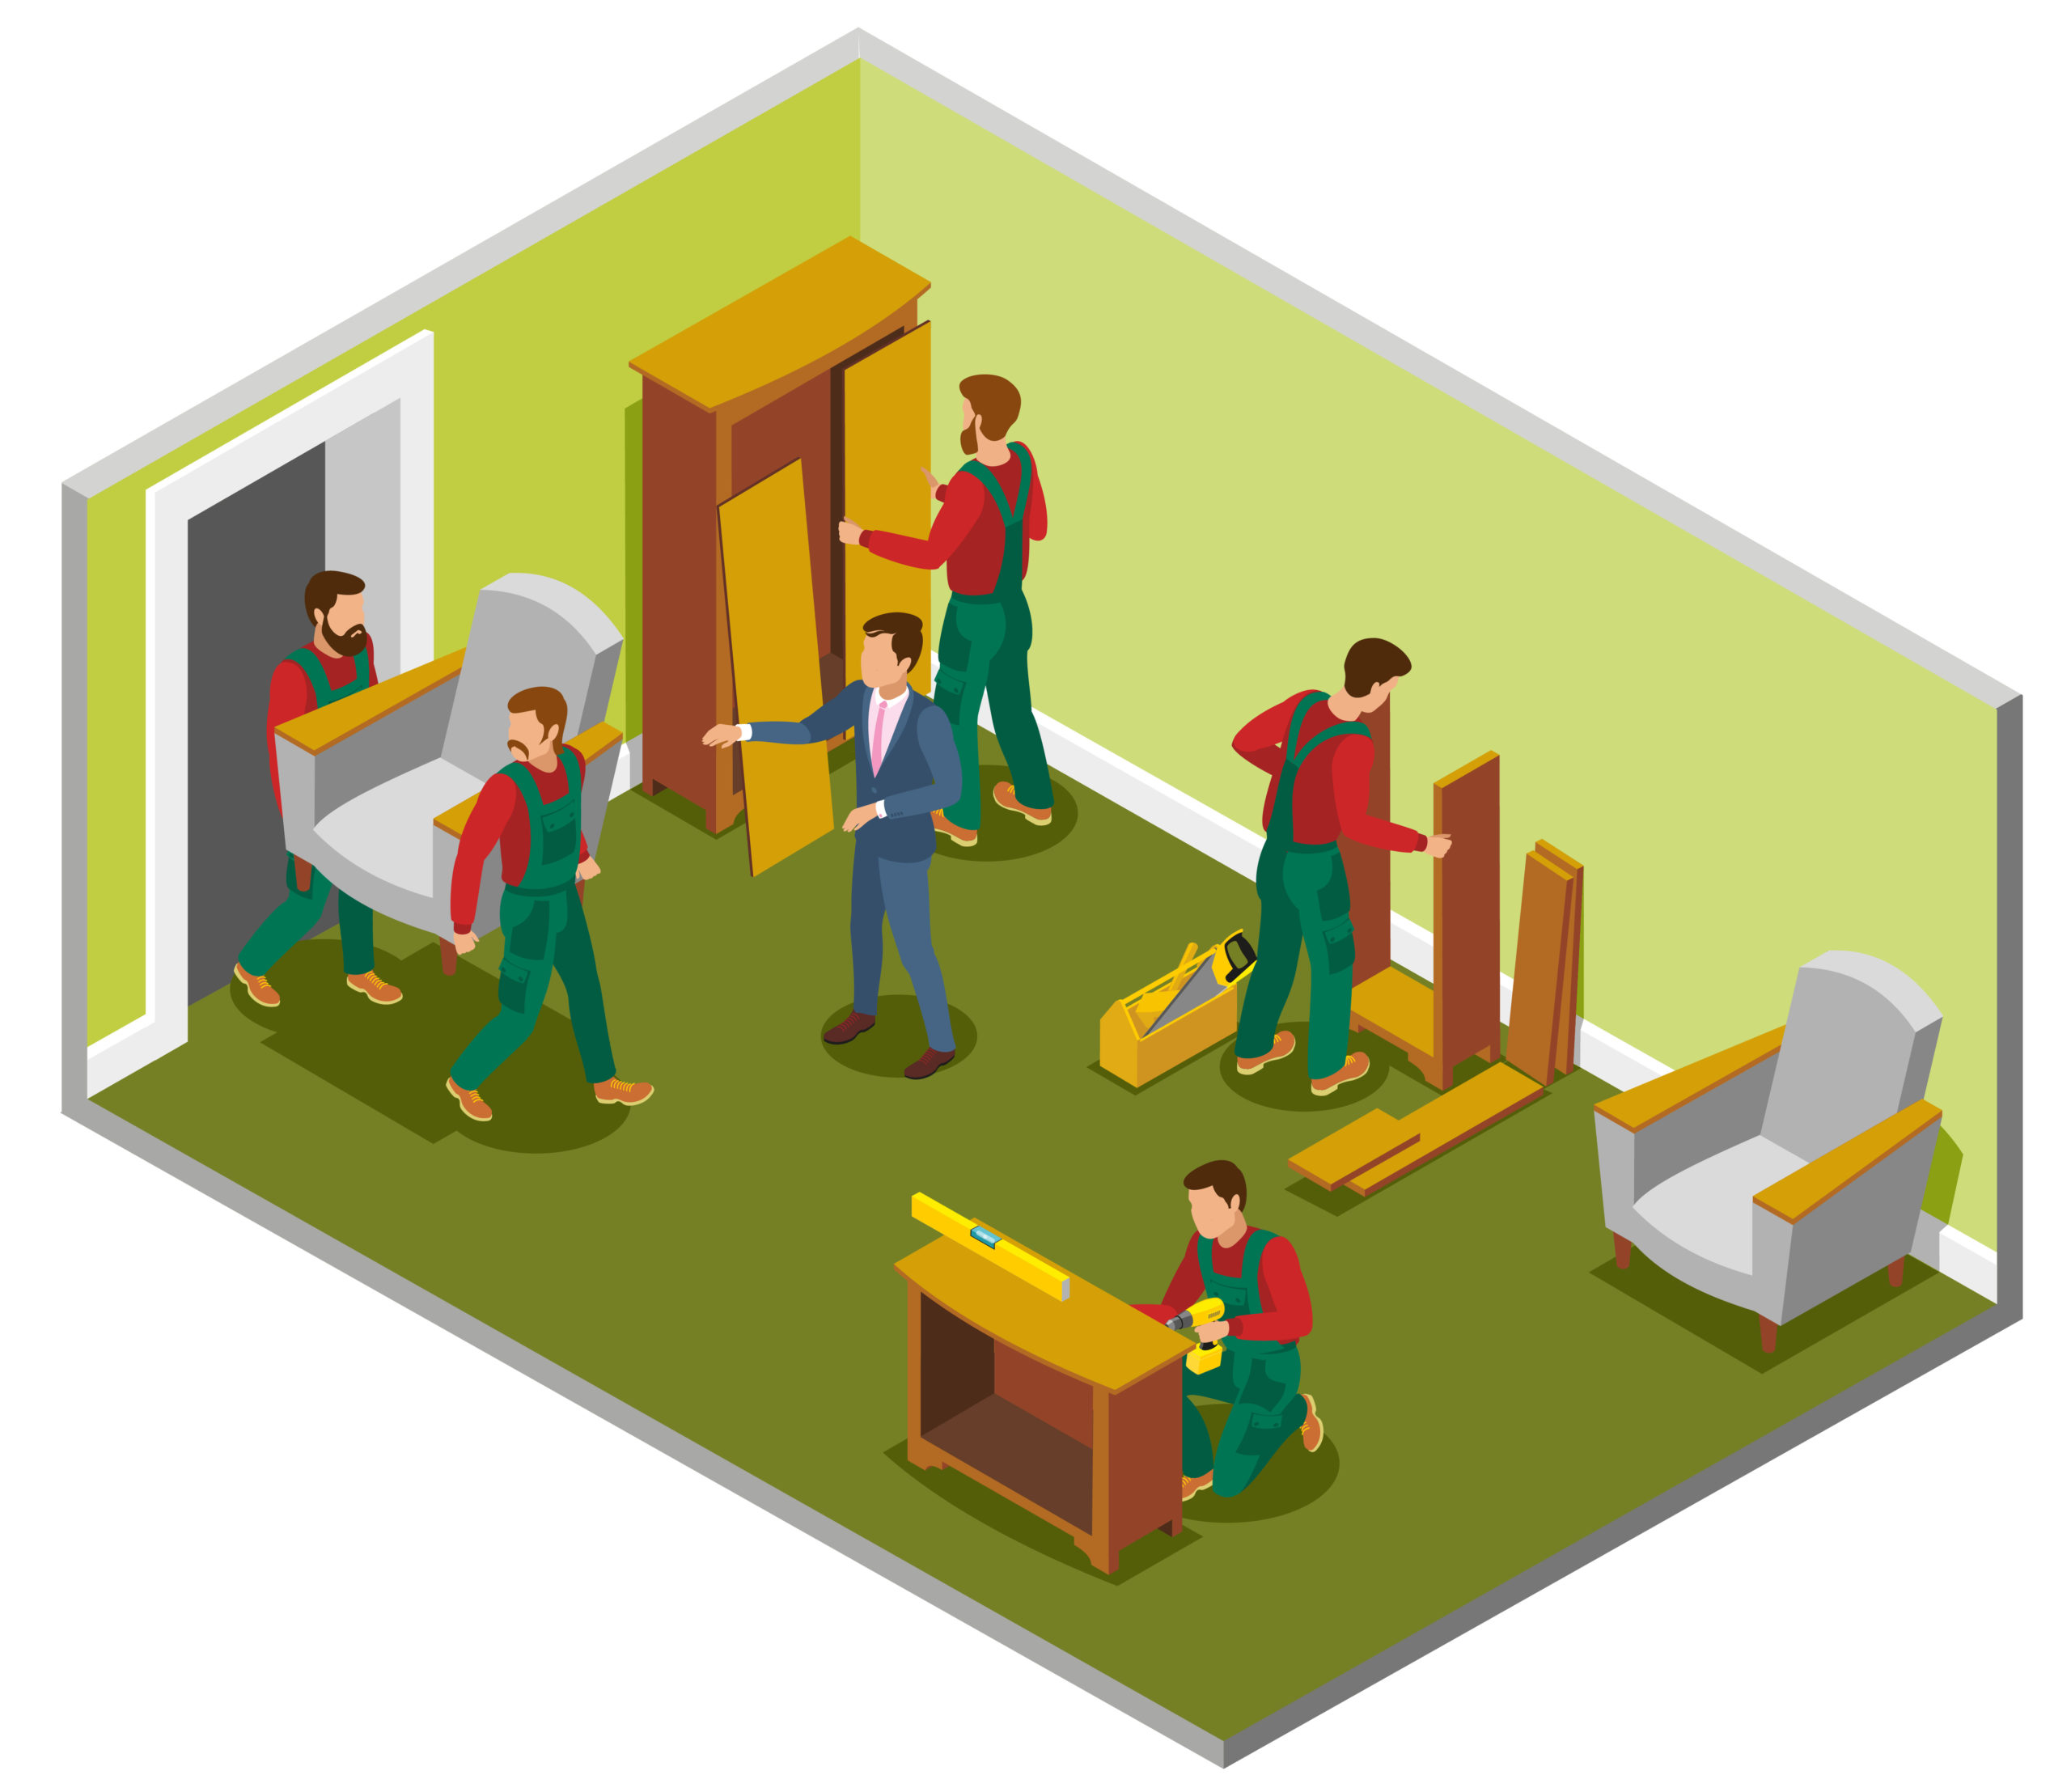 Furniture Delivery, Assembly and Installation: A potential business idea